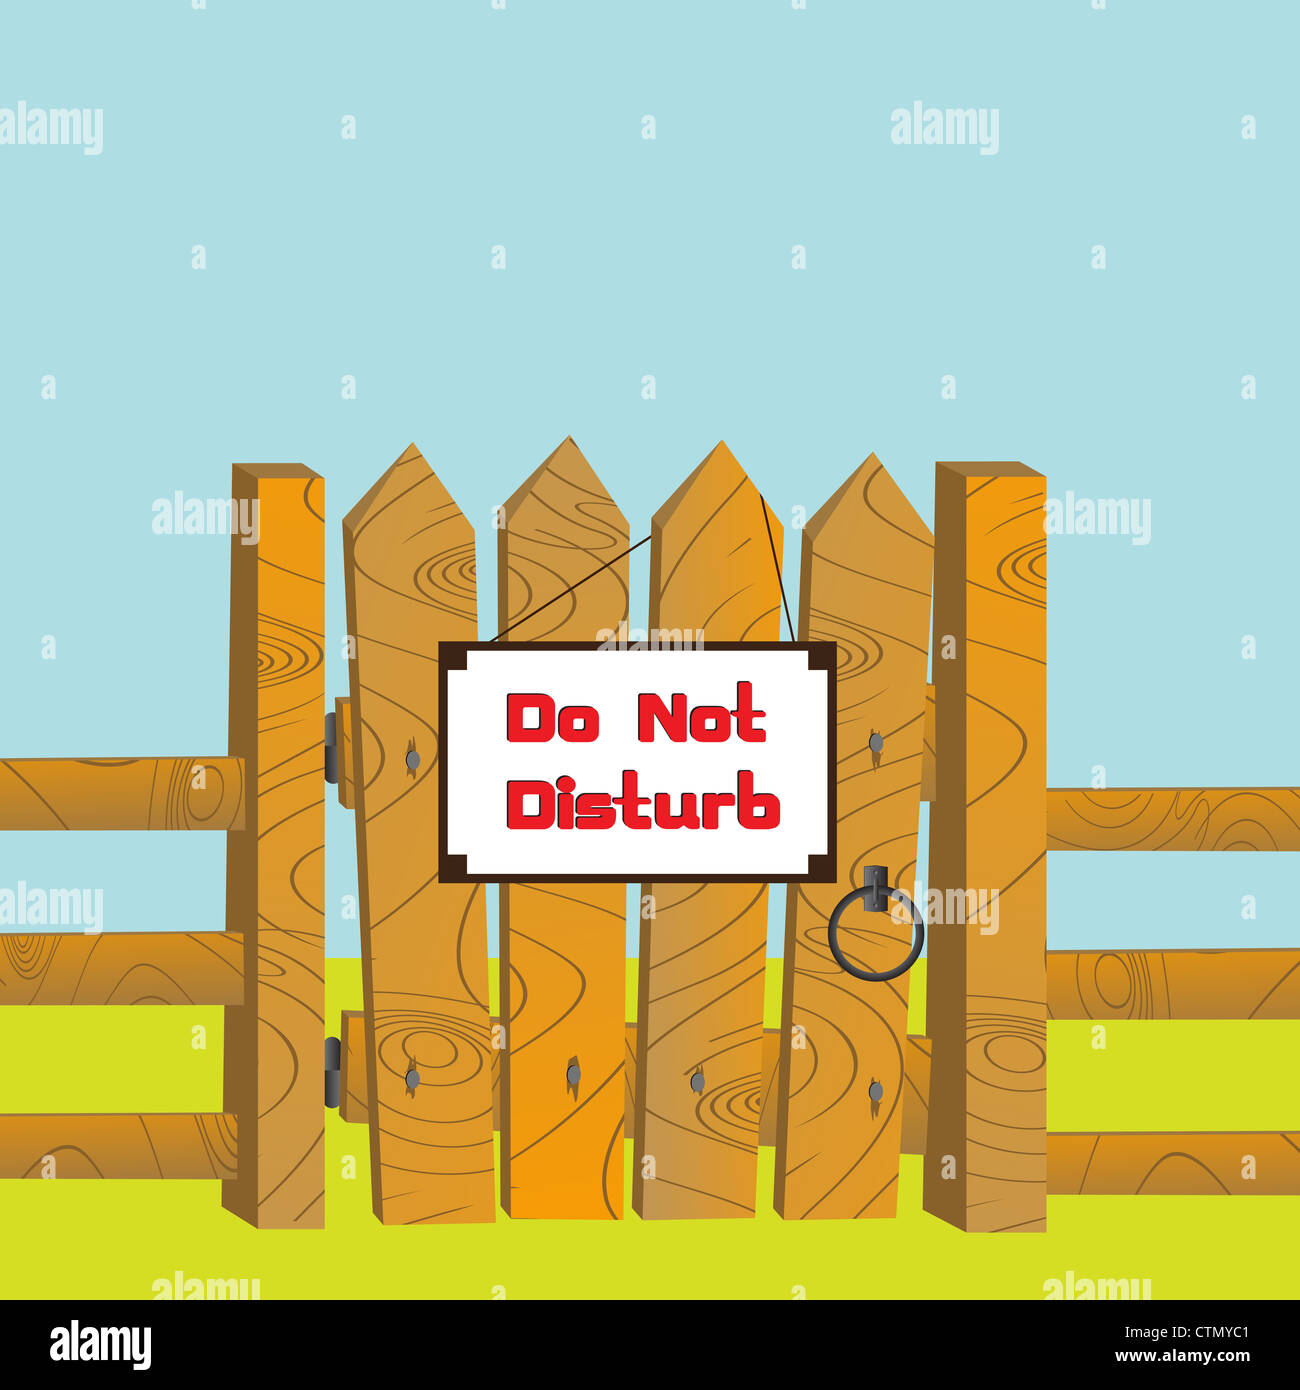 Cartoon style illustration of a wooden gate and fence with 